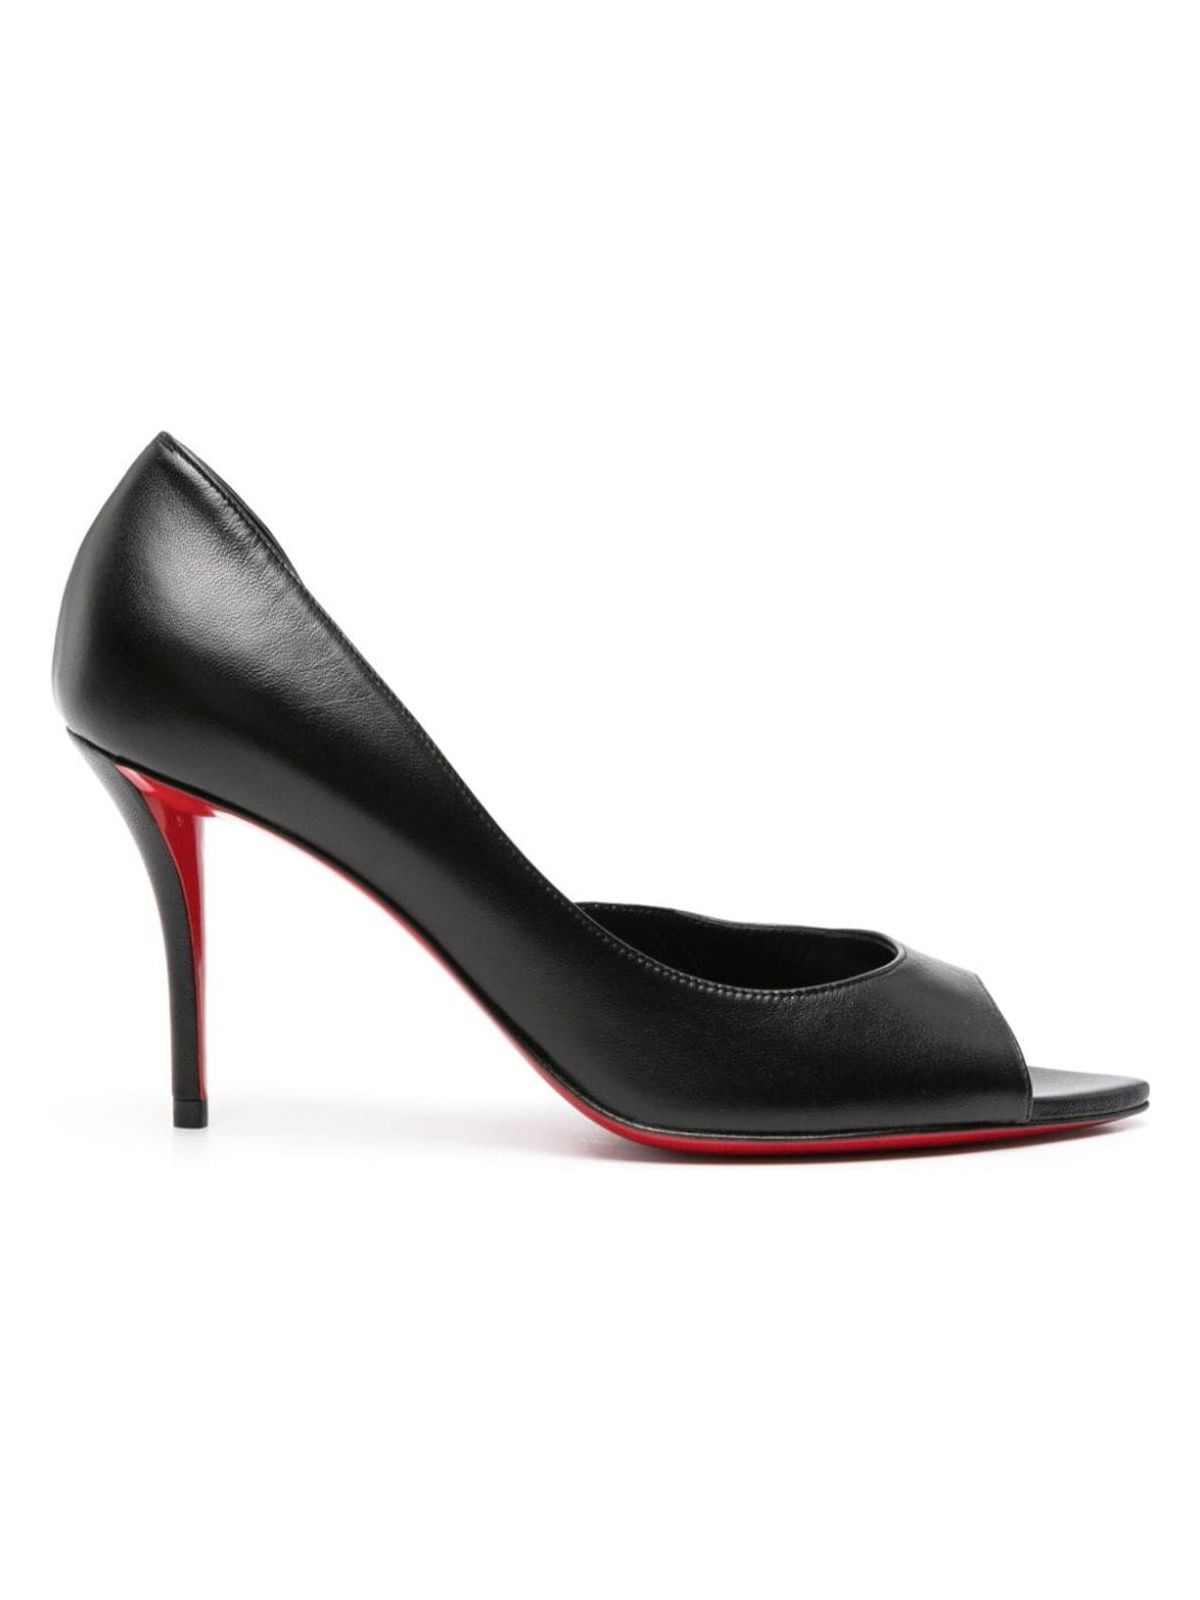 OPENAPOSTROPHAB439 CHRISTIAN LOUBOUTIN SMOOTH GRAIN POINTED OPEN TOE SLIP-ON STYLE 80MM STILETTO HEELS